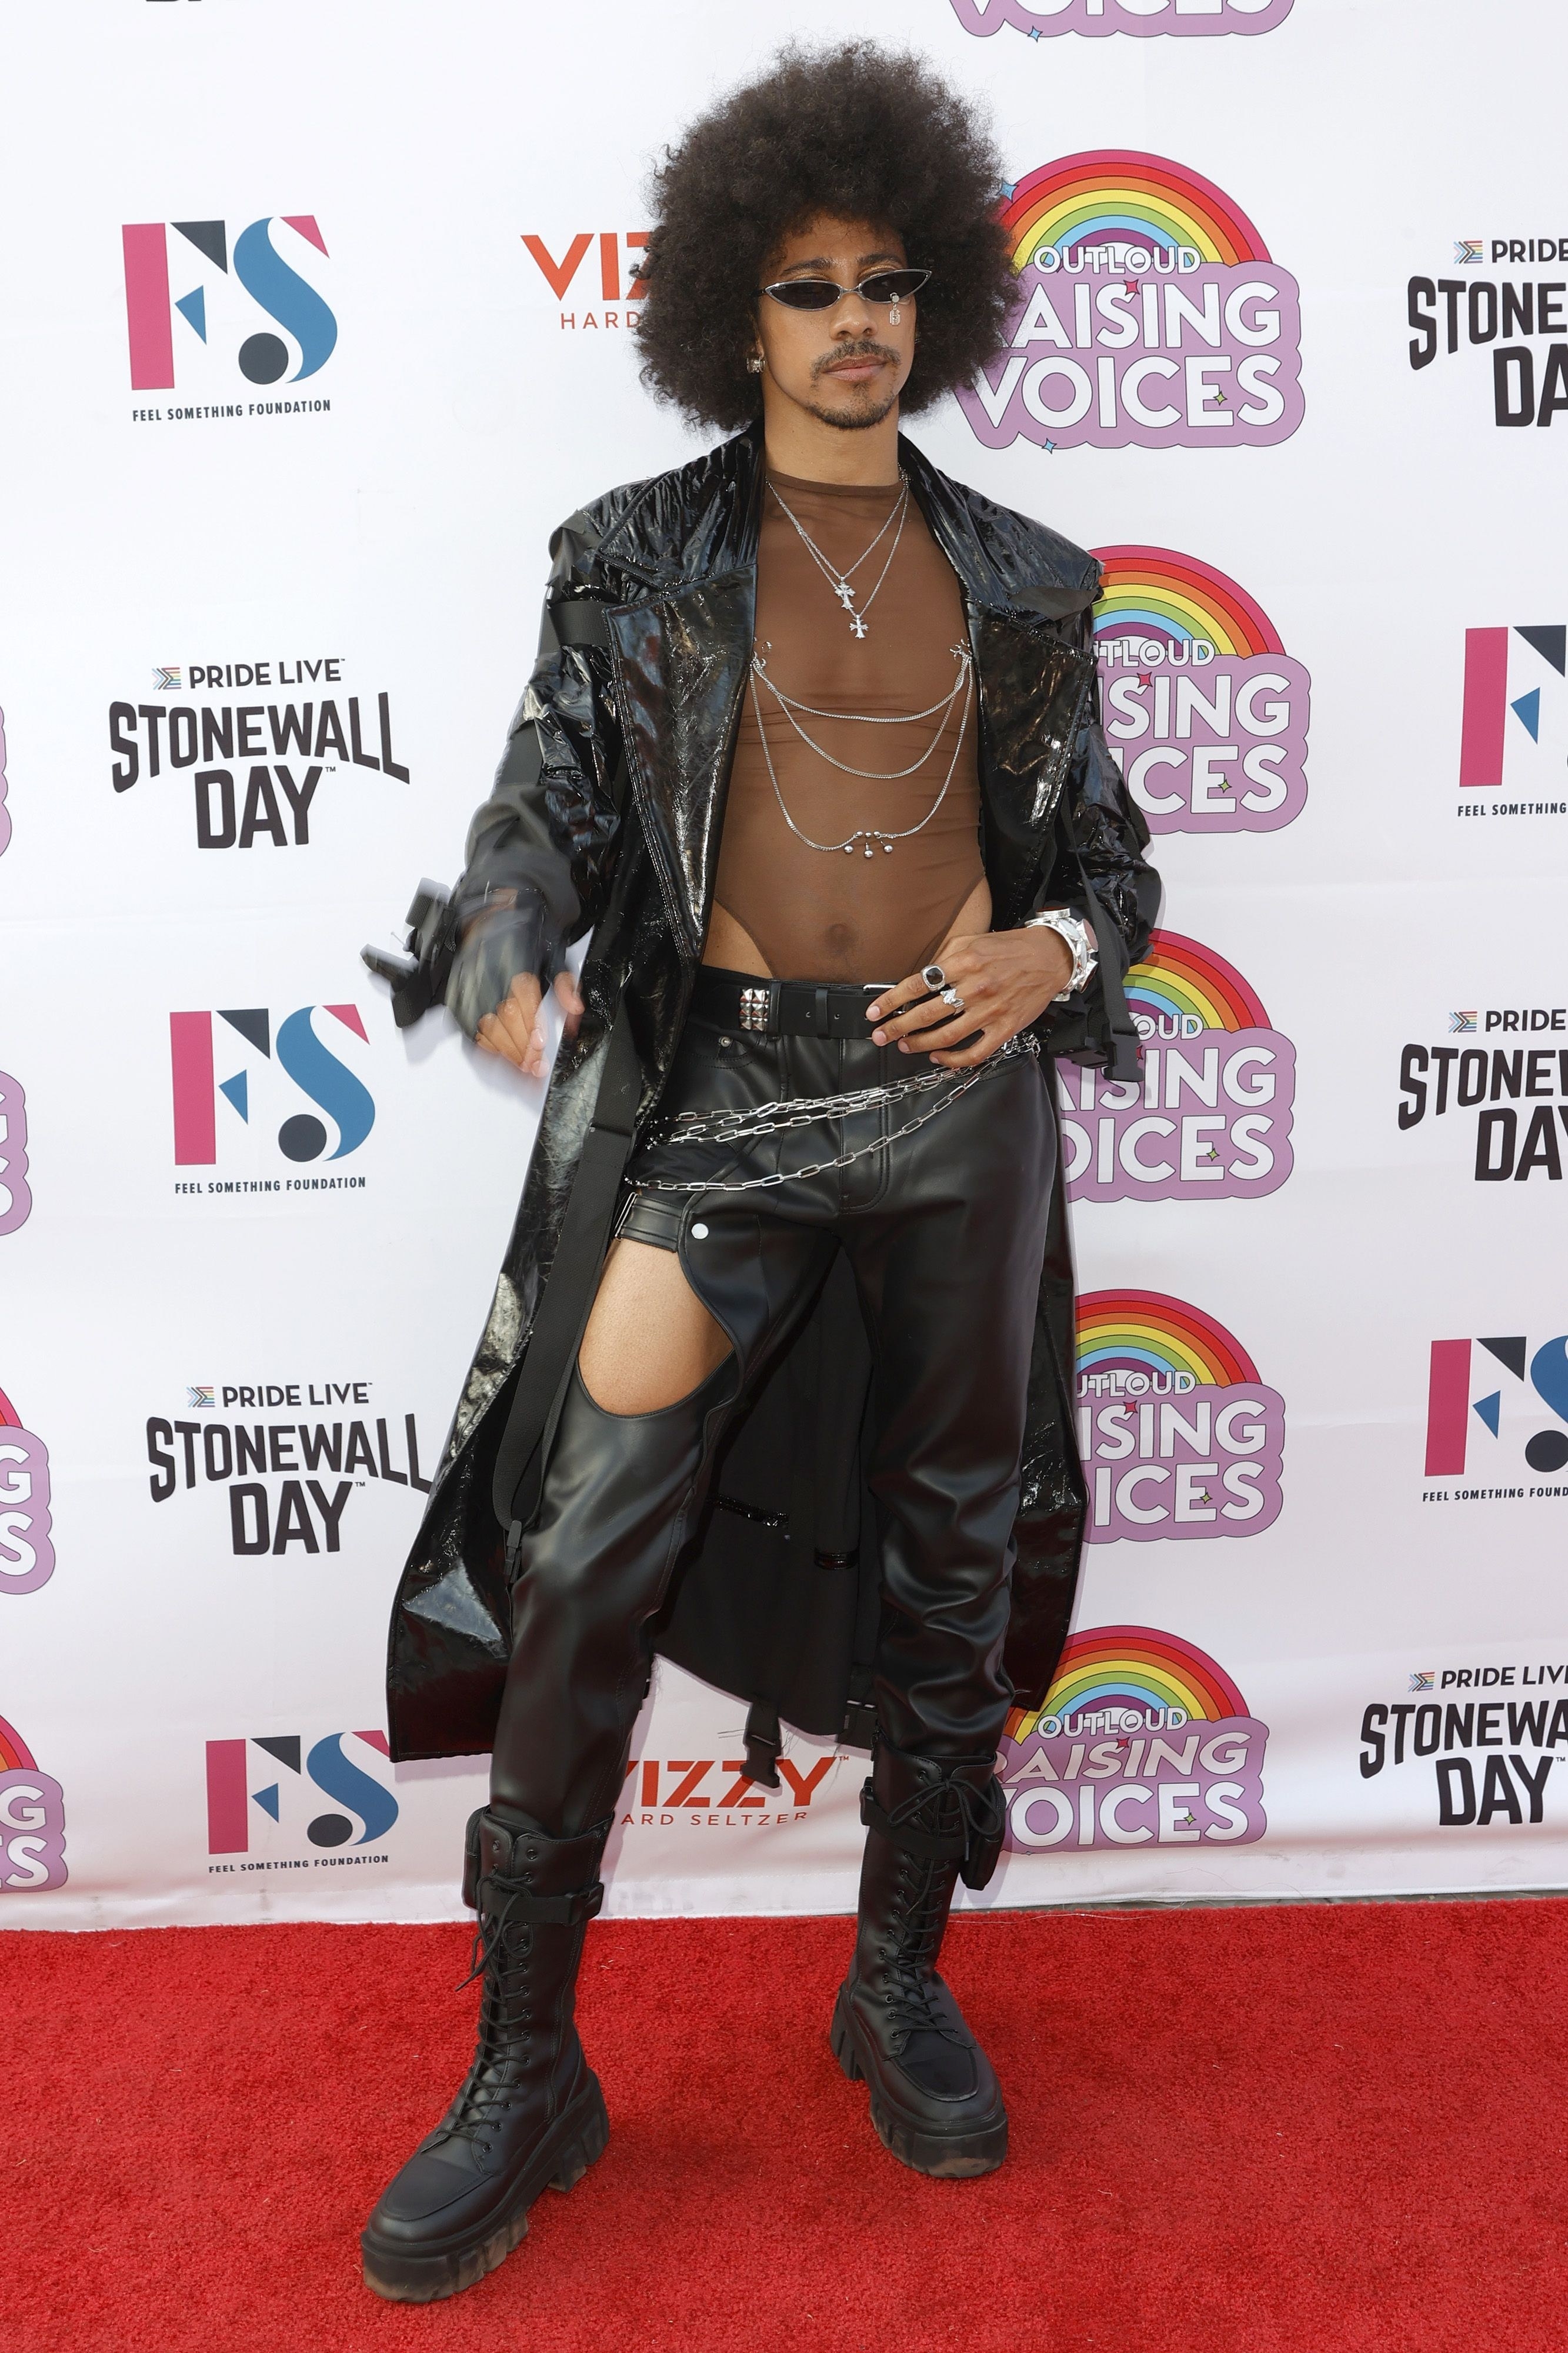 Keiynan Lonsdale poses on the red carpet in an all-black outfit with boots, leather pants, a mesh bodysuit, and long black coat, with sunglasses